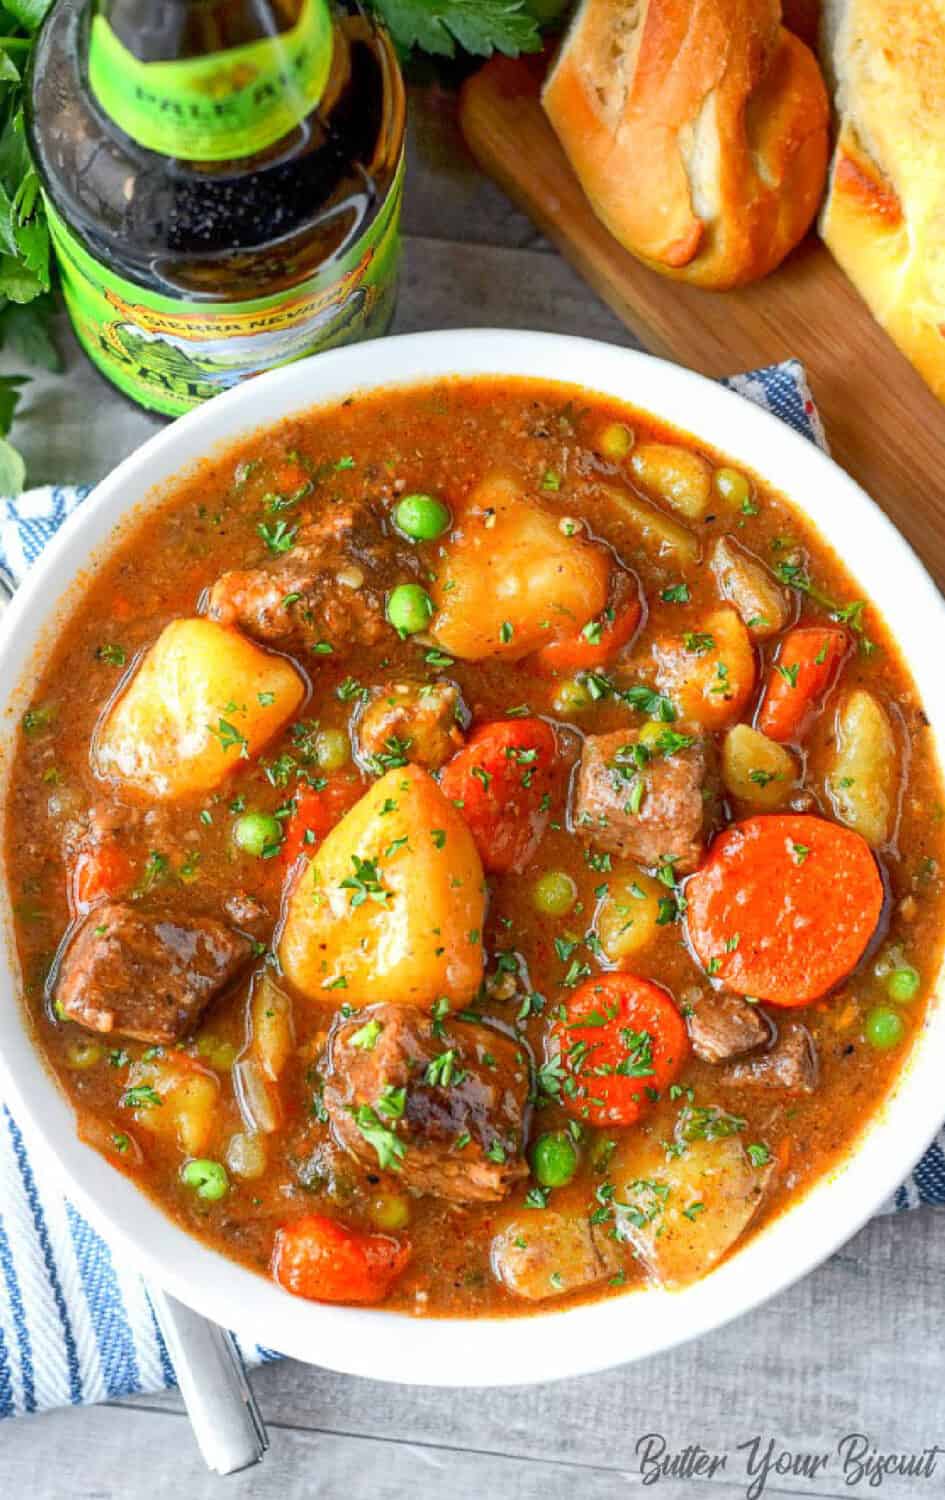 Hearty Beef Stew Easy Recipe - Butter Your Biscuit